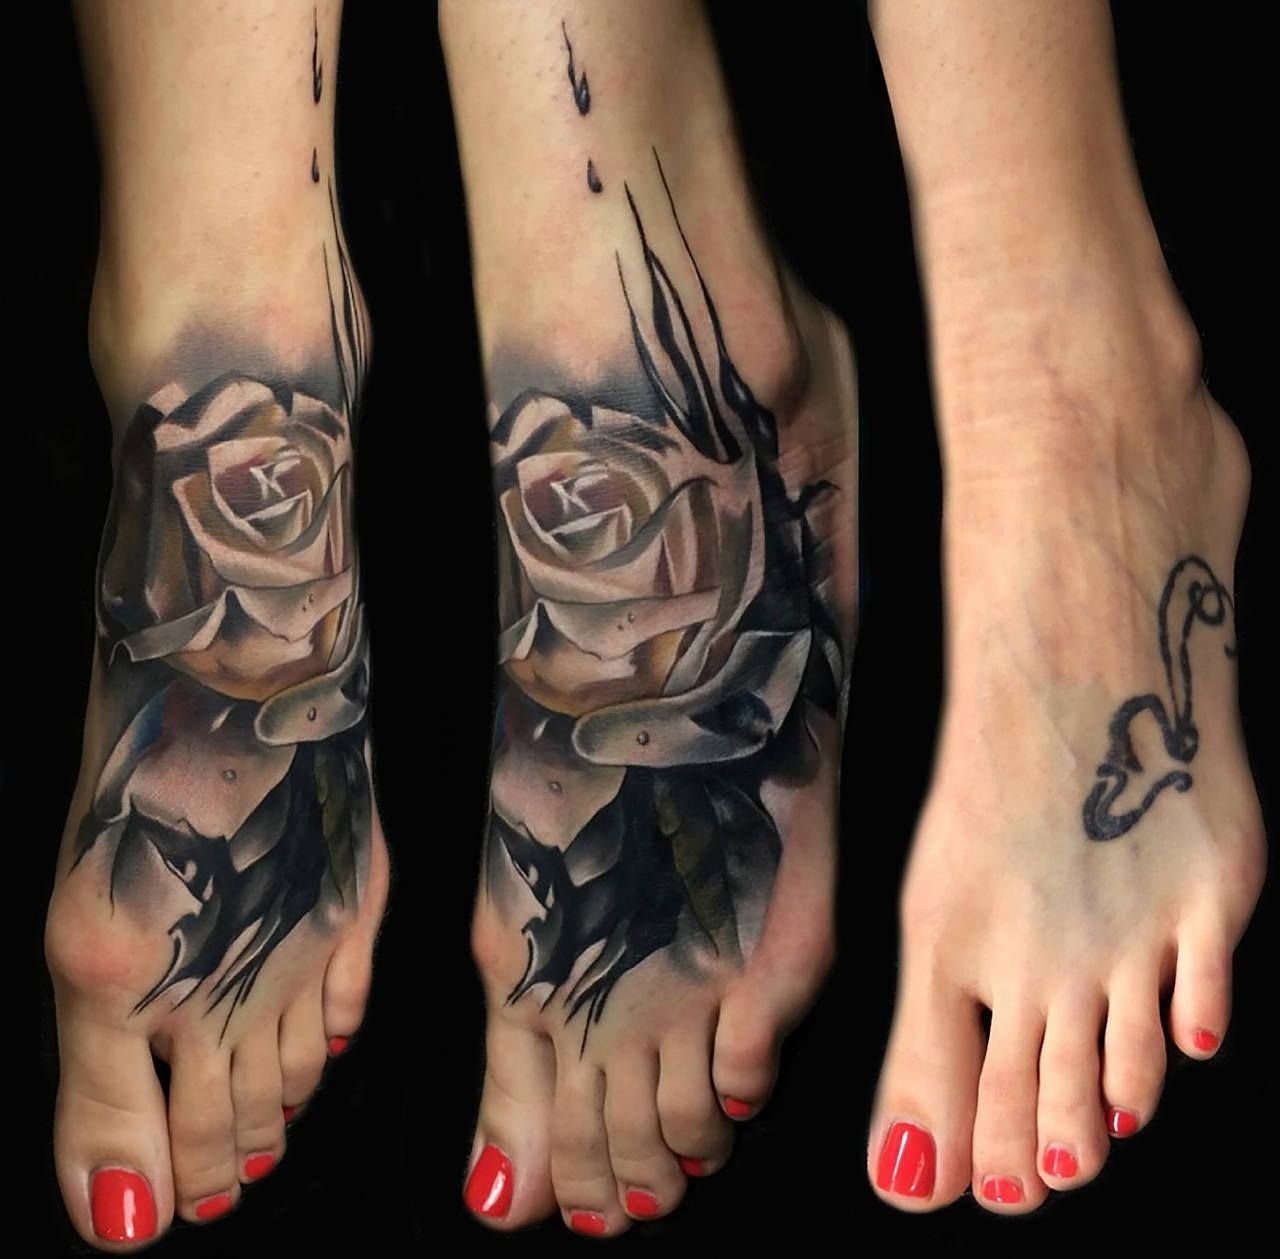 10 Fabulous Good Tattoo Cover Up Ideas coverup tattoo foot rose cover up tattoo design best tattoo 3 2022